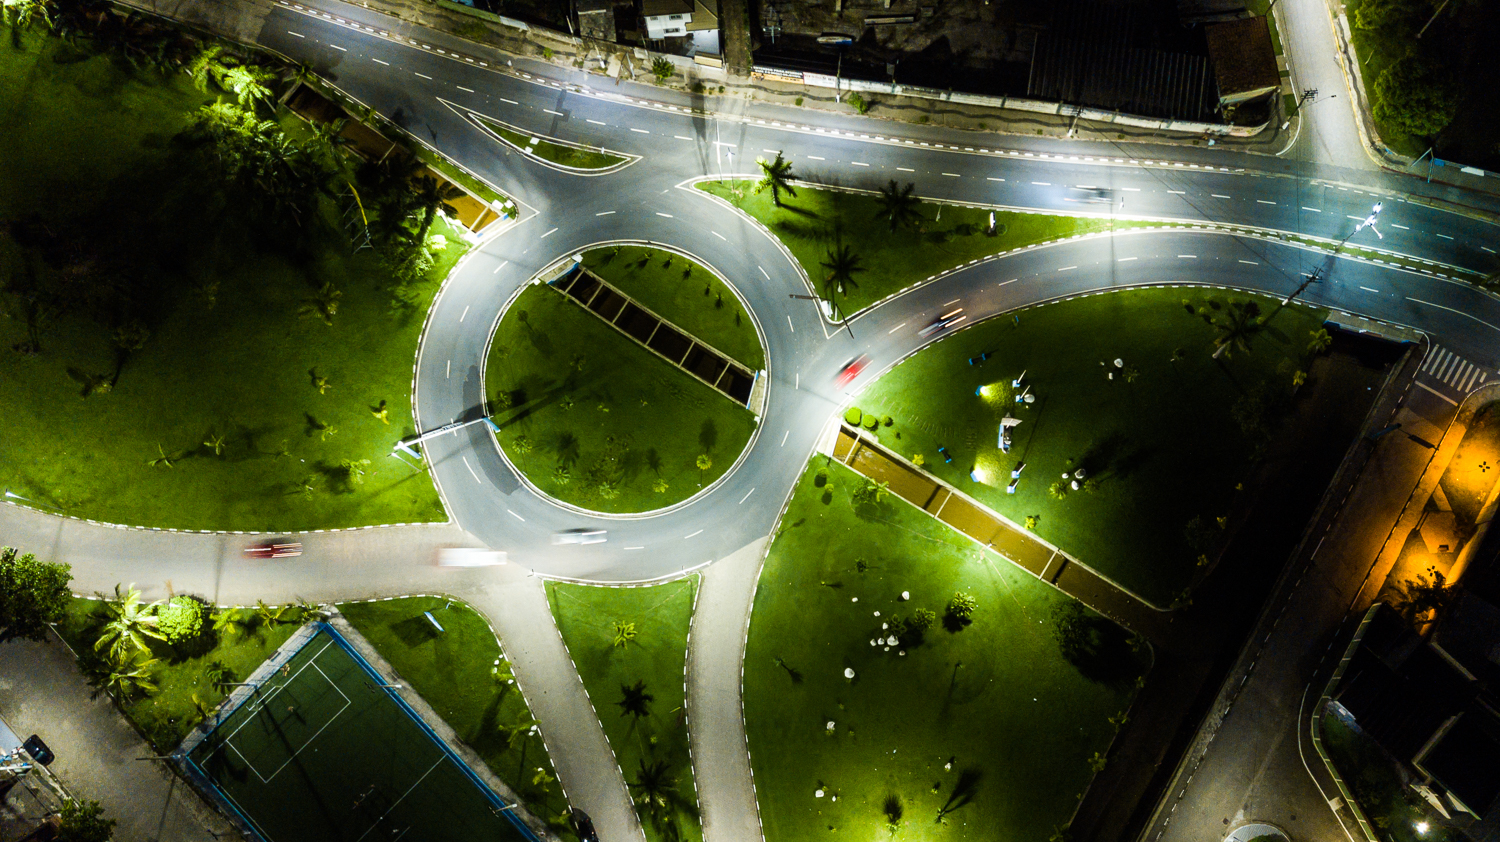 GRUPO CONASA INVESTMENTS RESULT IN THE FIRST PPP FOR STREET LIGHTING IMPLEMENTED 100% IN BRAZIL